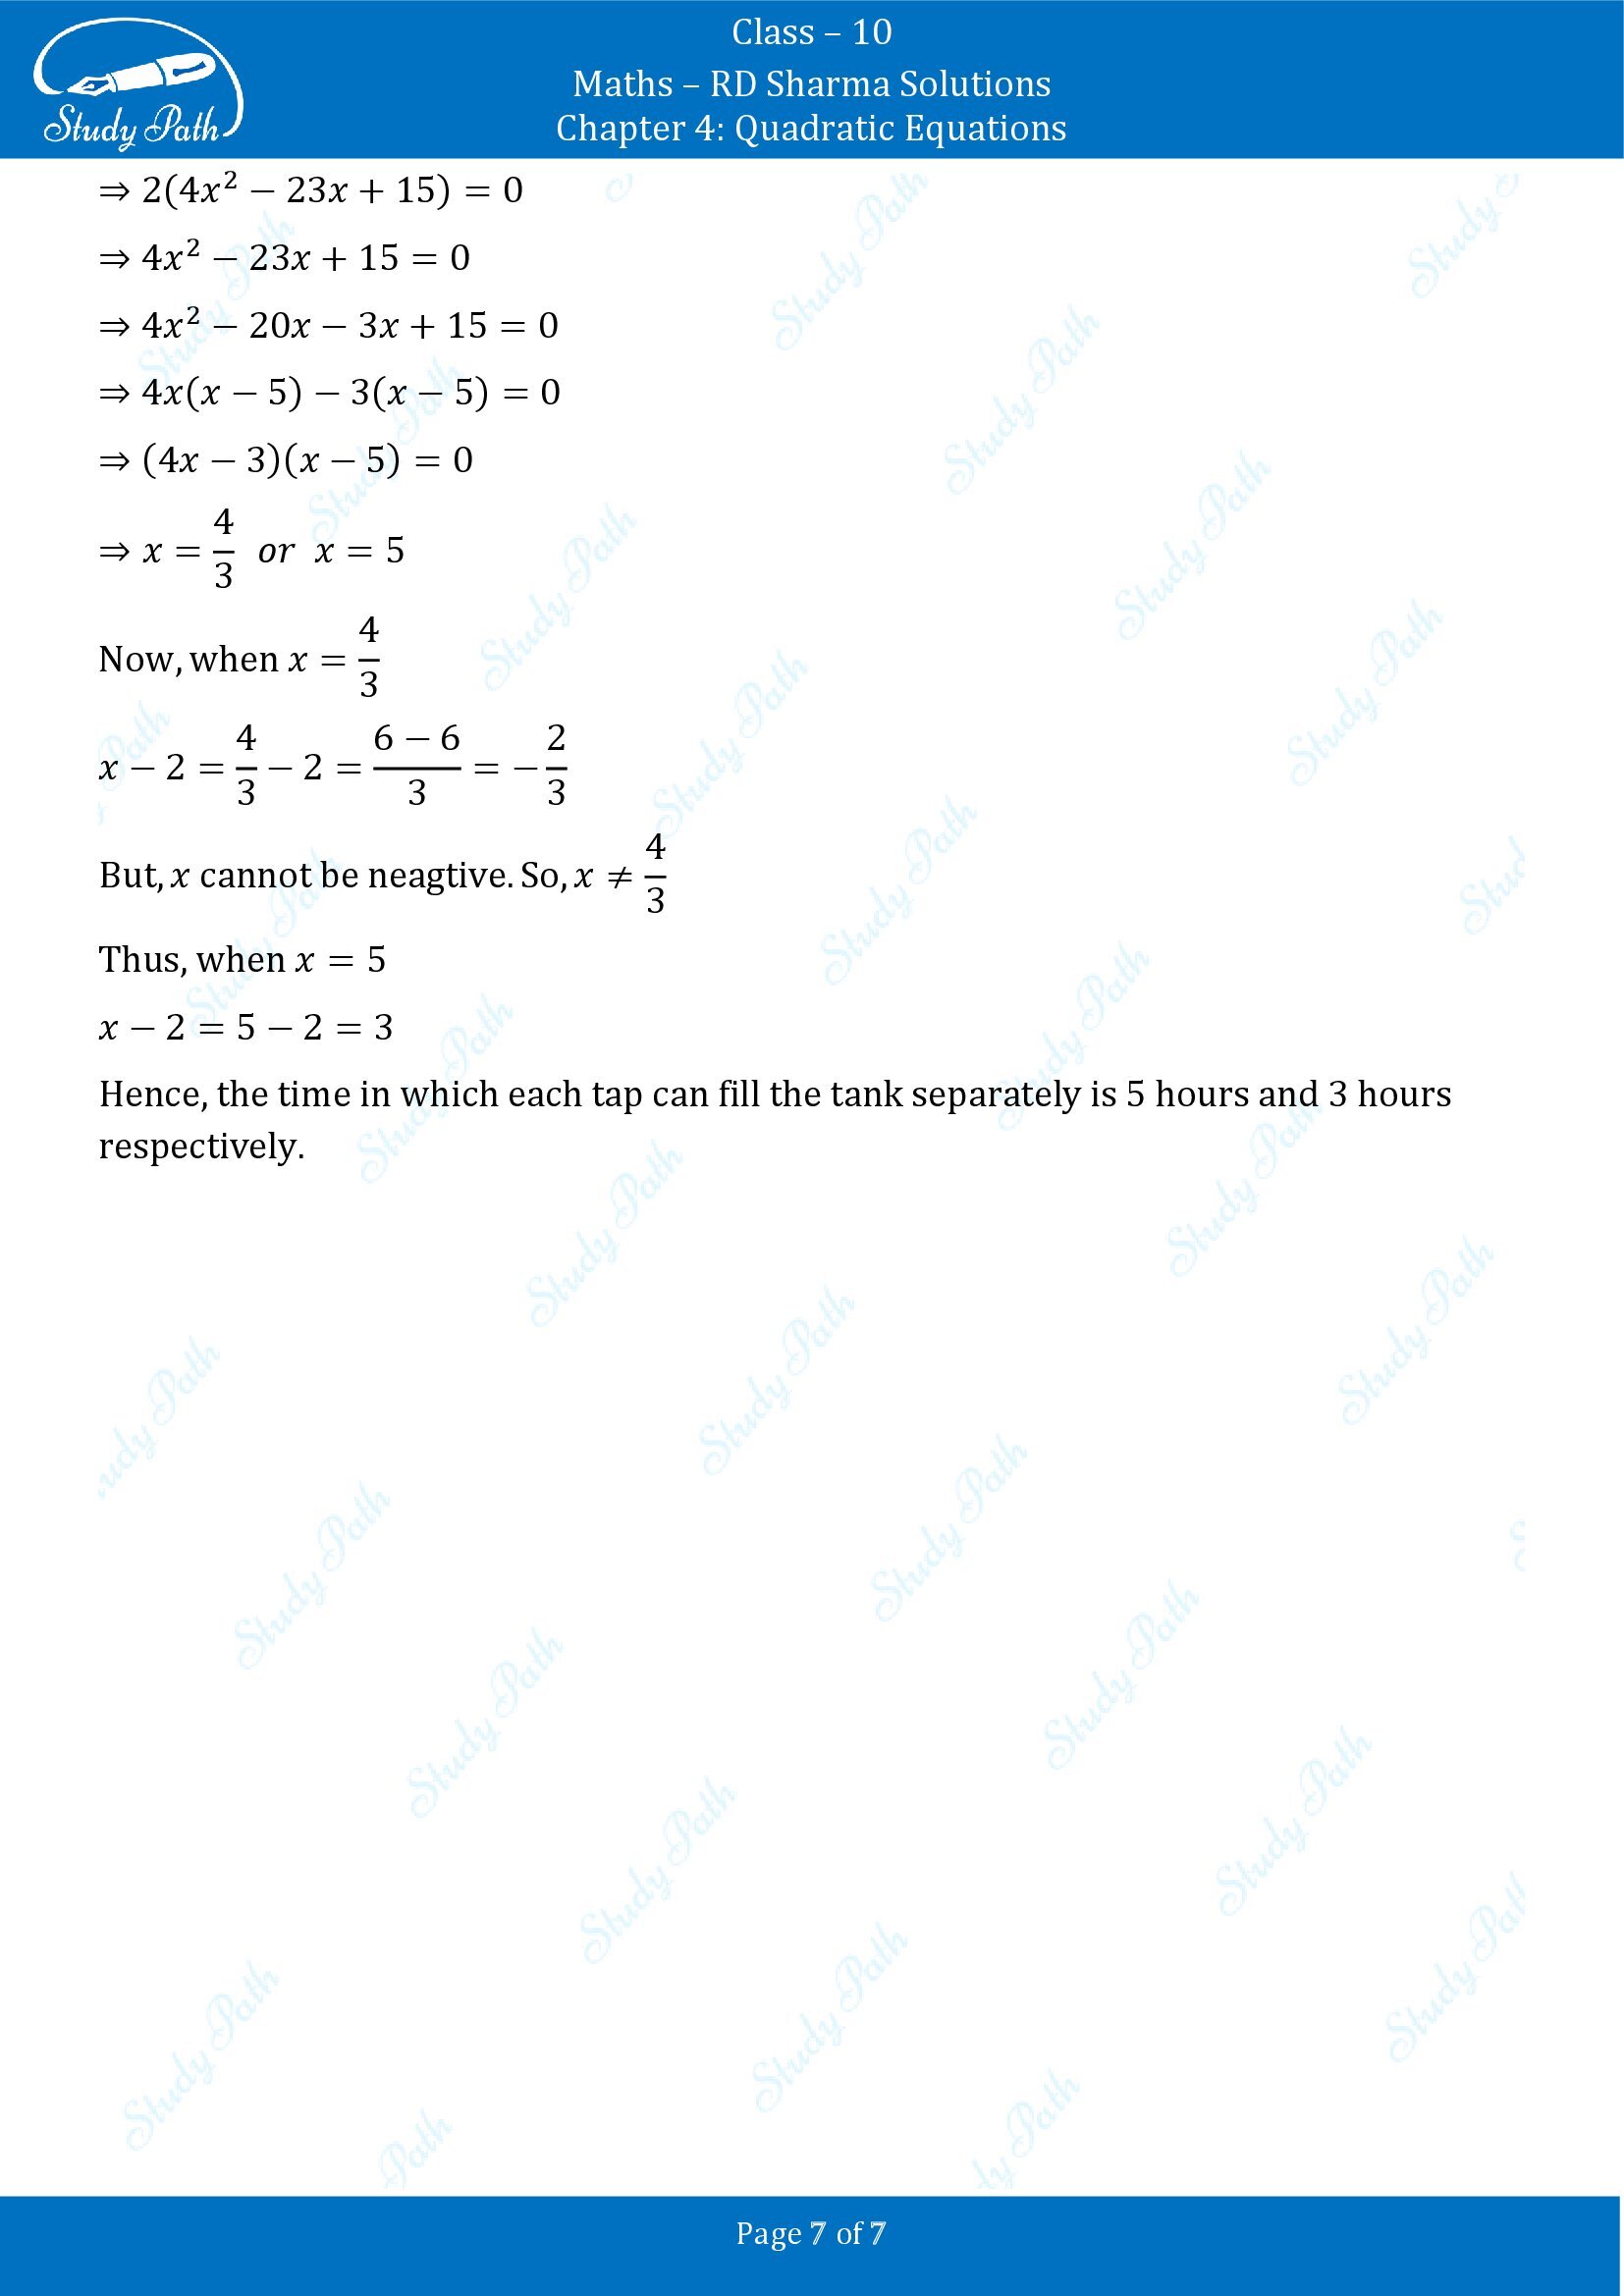 RD Sharma Solutions Class 10 Chapter 4 Quadratic Equations Exercise 4.12 00007